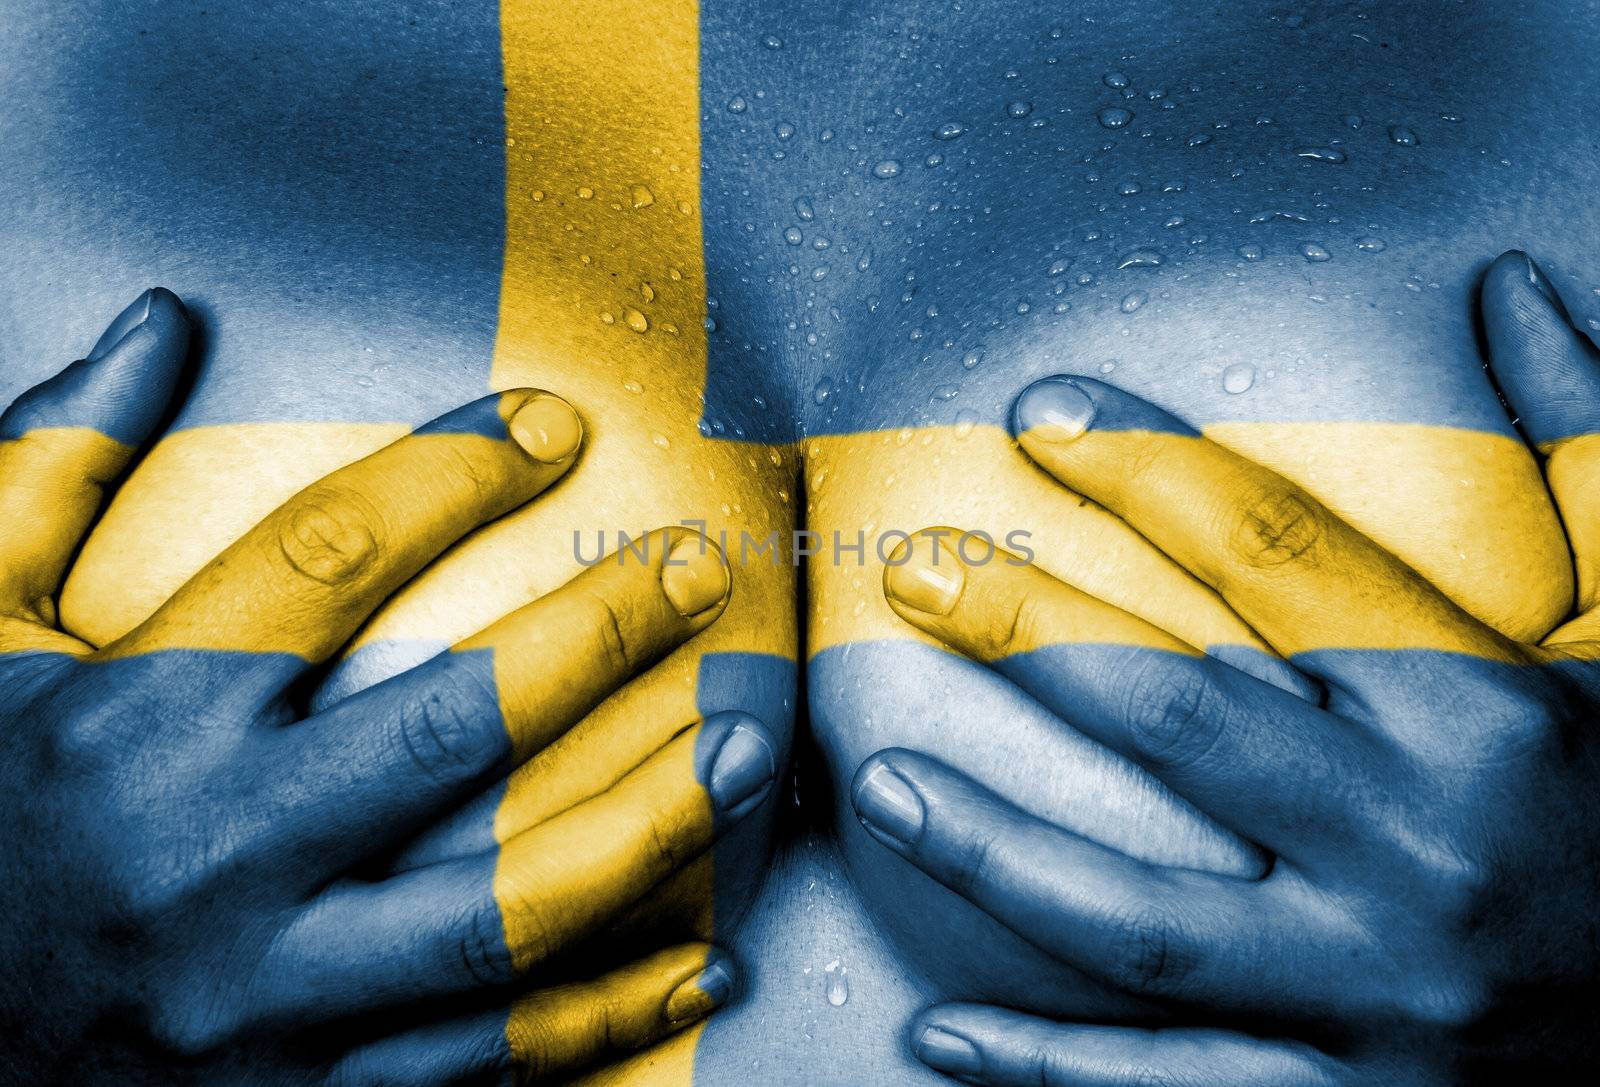 Sweaty upper part of female body, hands covering breasts, flag of Sweden